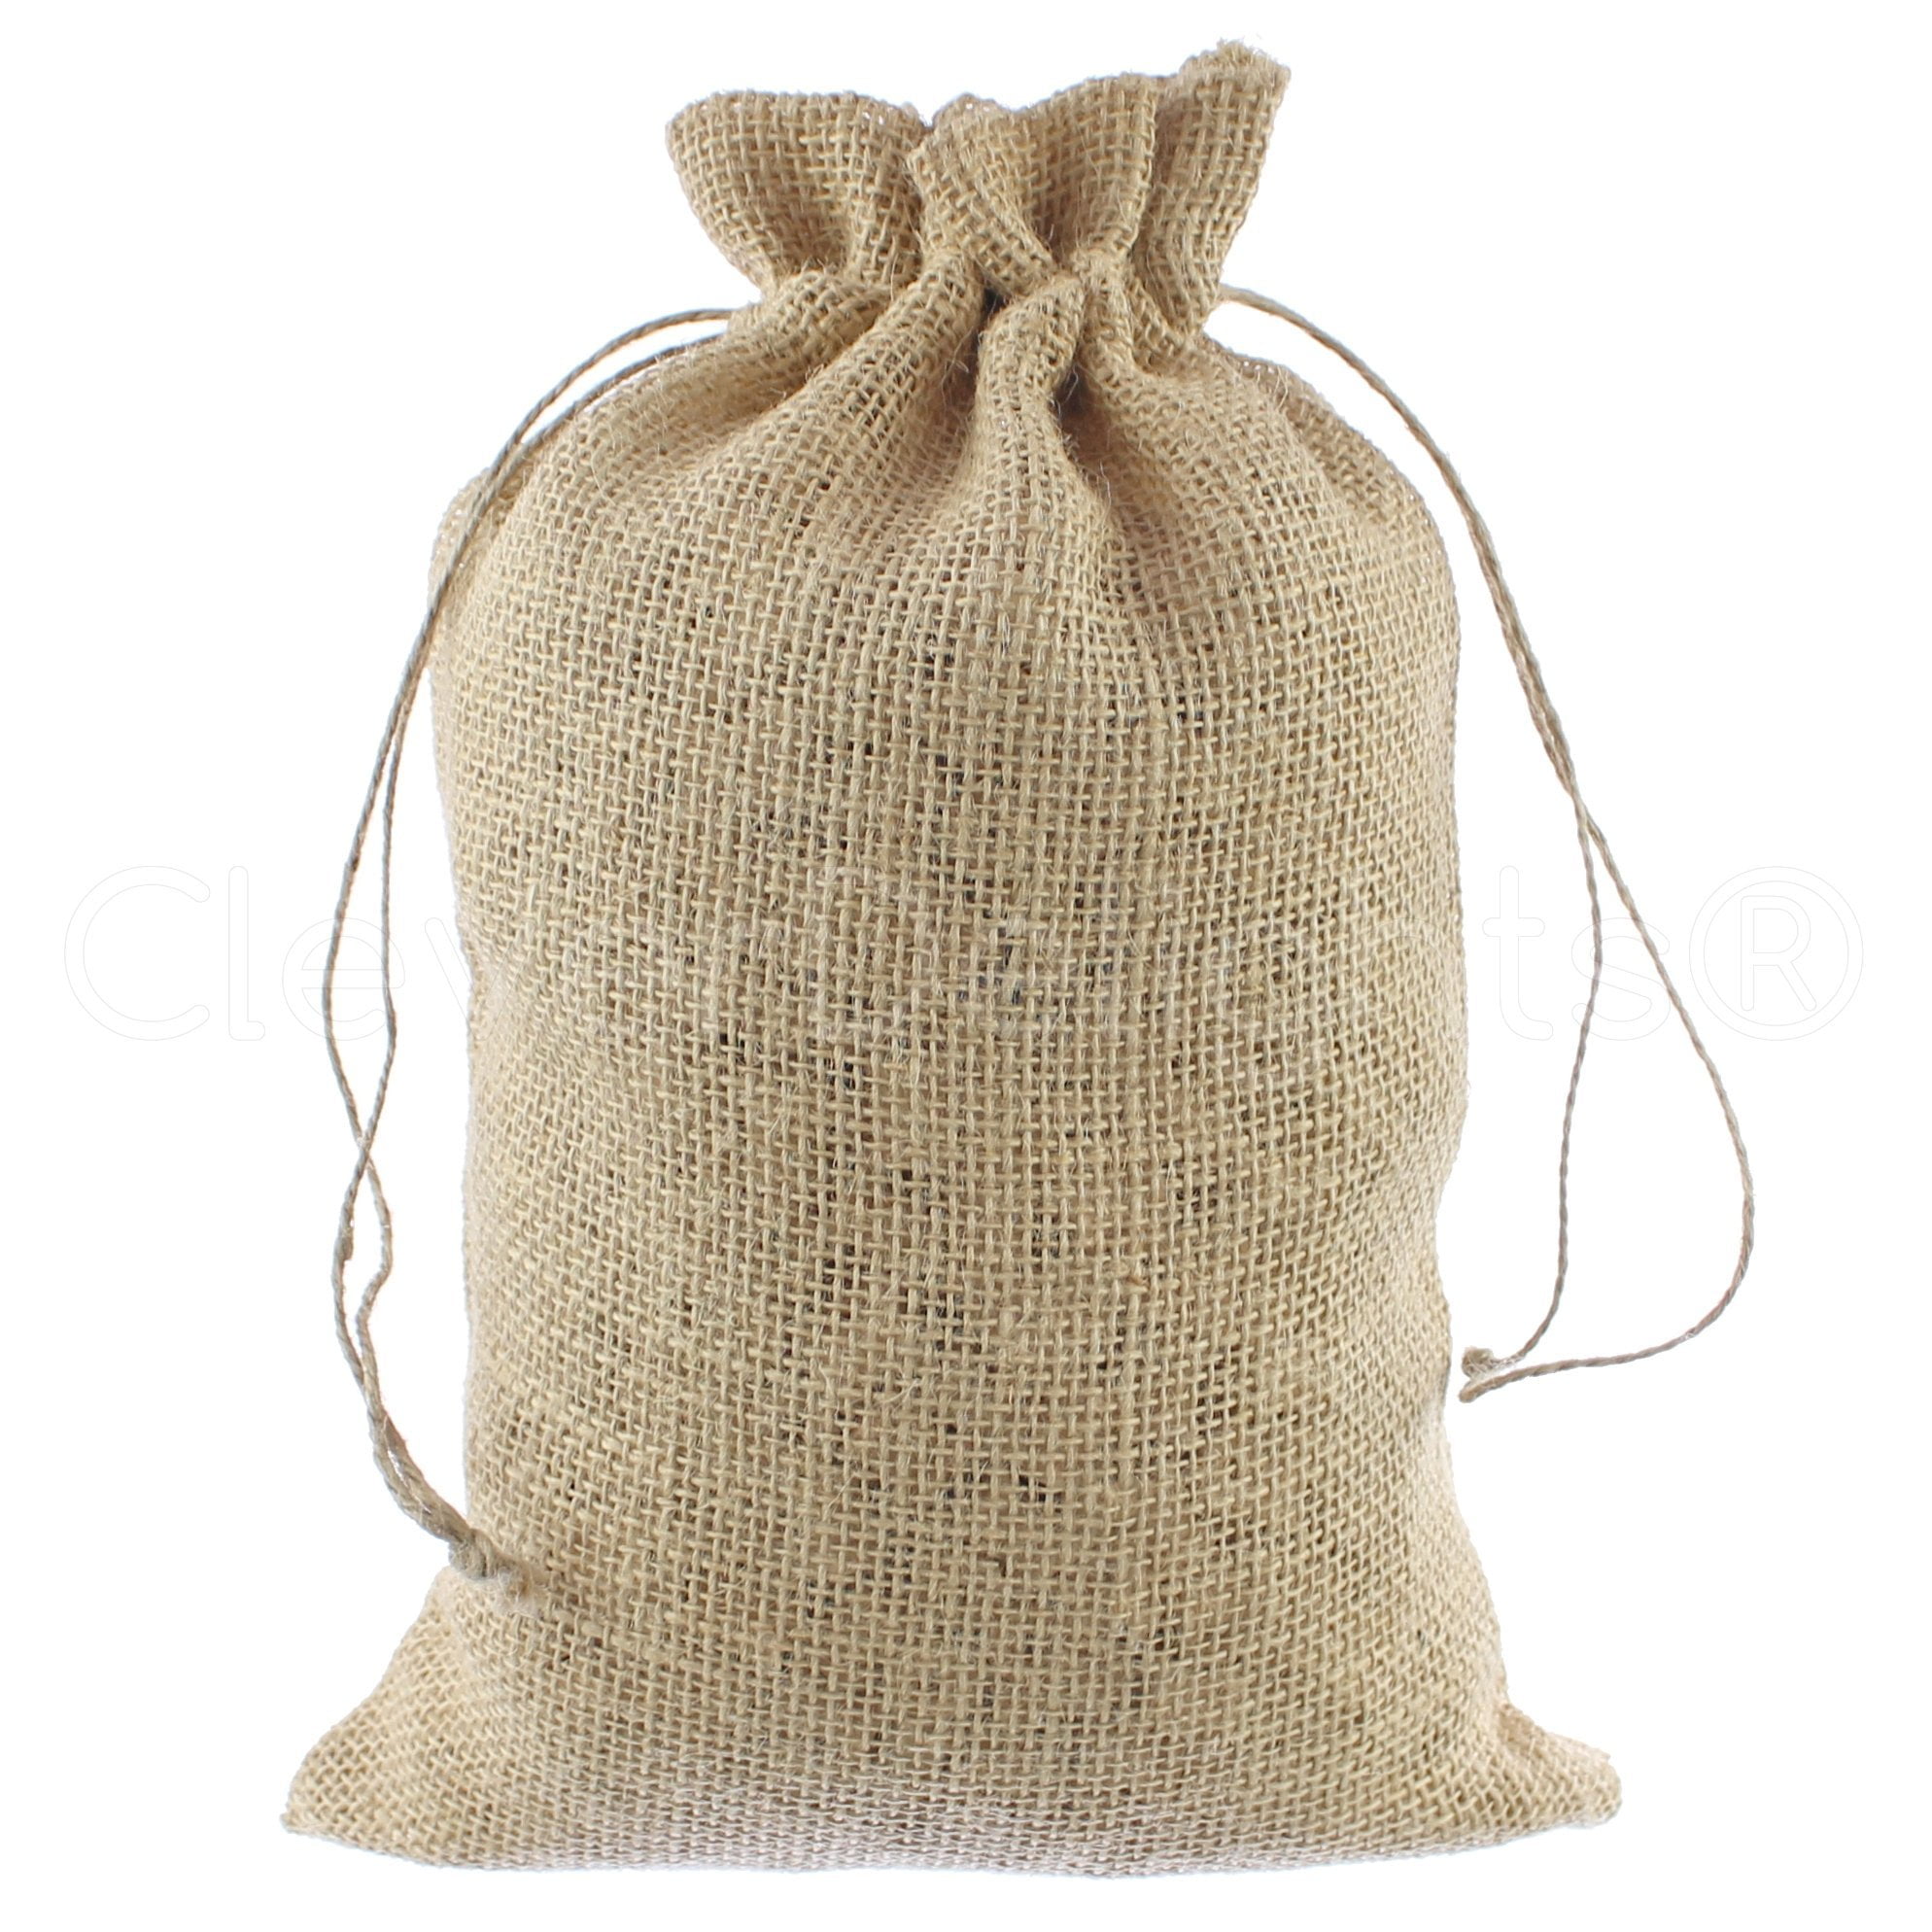 2" x 3" Burlap Bags with Natural Jute Drawstring Pouch Sack Bag 2x3 Inch 